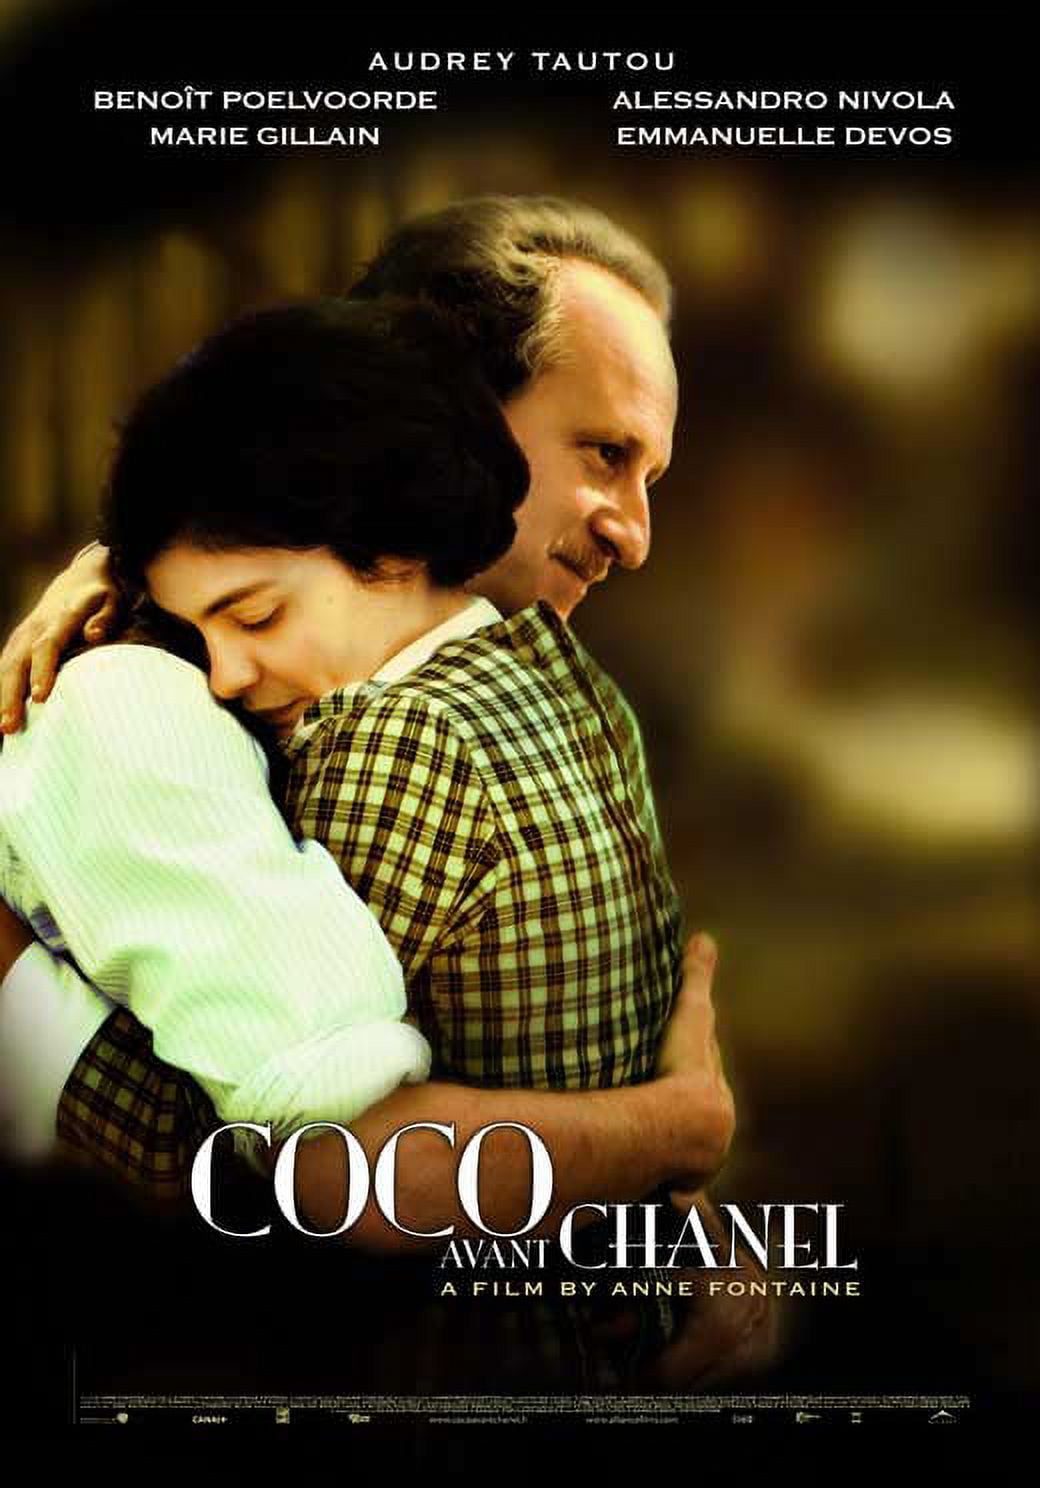 Coco Avant Chanel - movie POSTER (Style C) (27 x 40) (2009